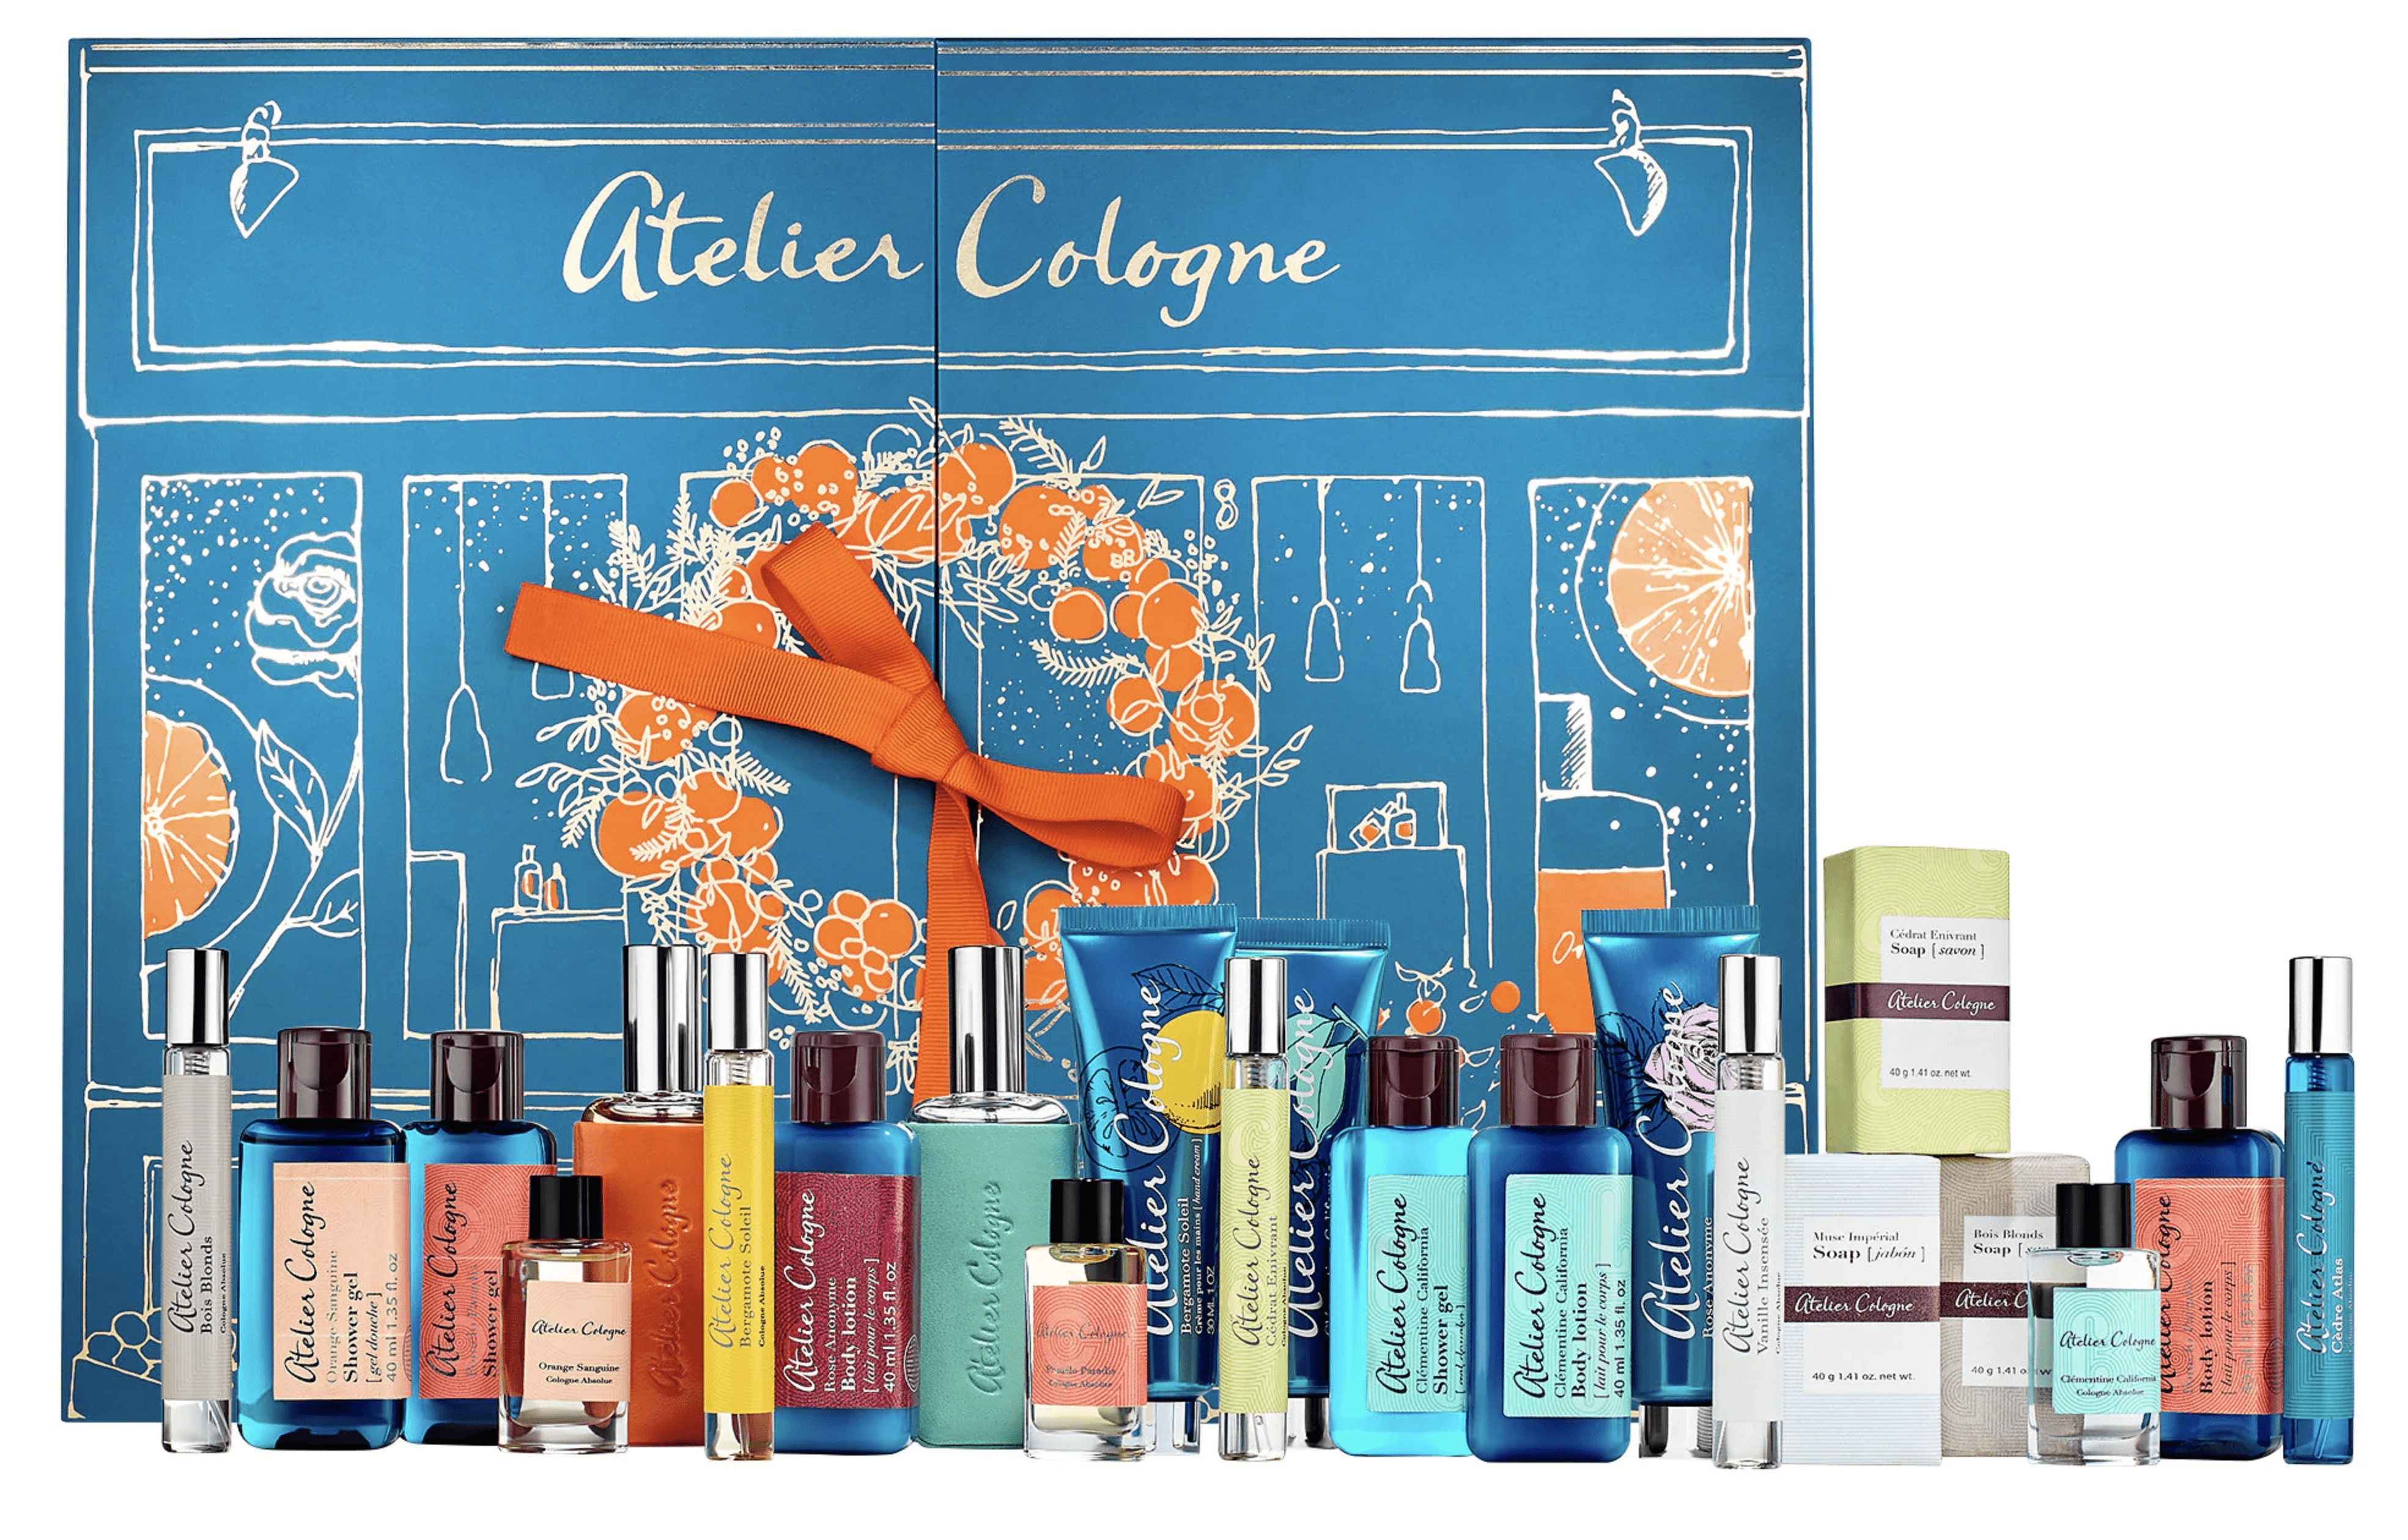 2018 Atelier Cologne Luxury Advent Calendar Available Now + Full